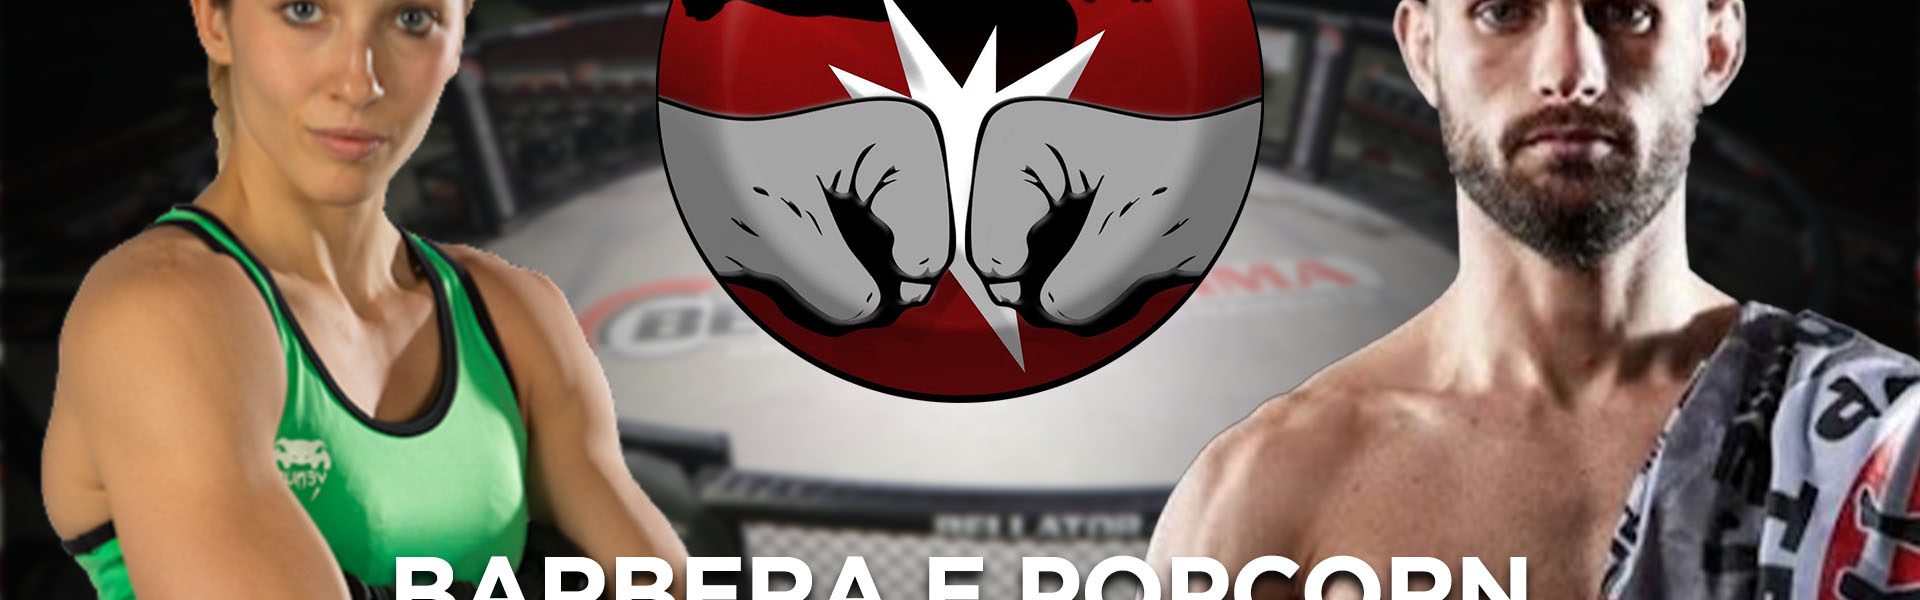 Barbera e Popcorn - Il weekend delle MMA Made in Italy - The Real FIGHT Talk Show Ep. 59